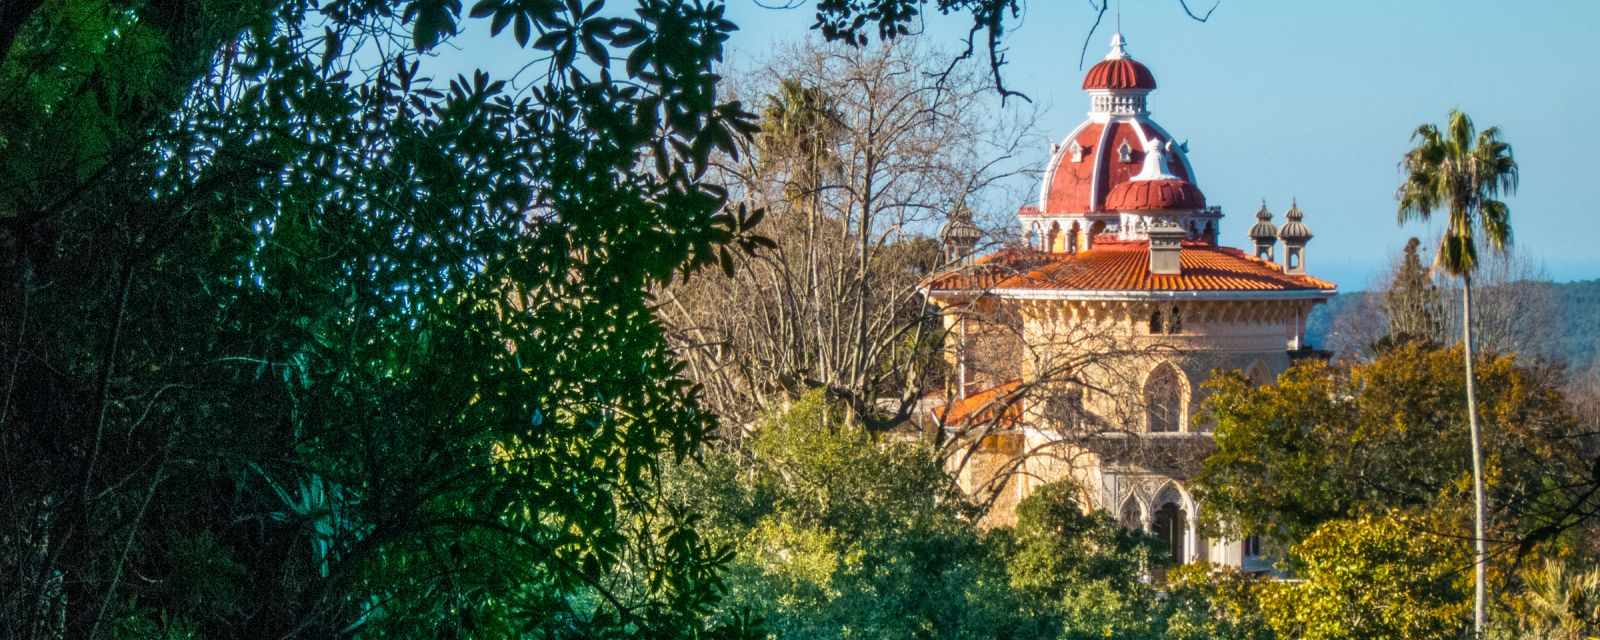 Season Guide and Tickets for Monserrate Palace in Sintra